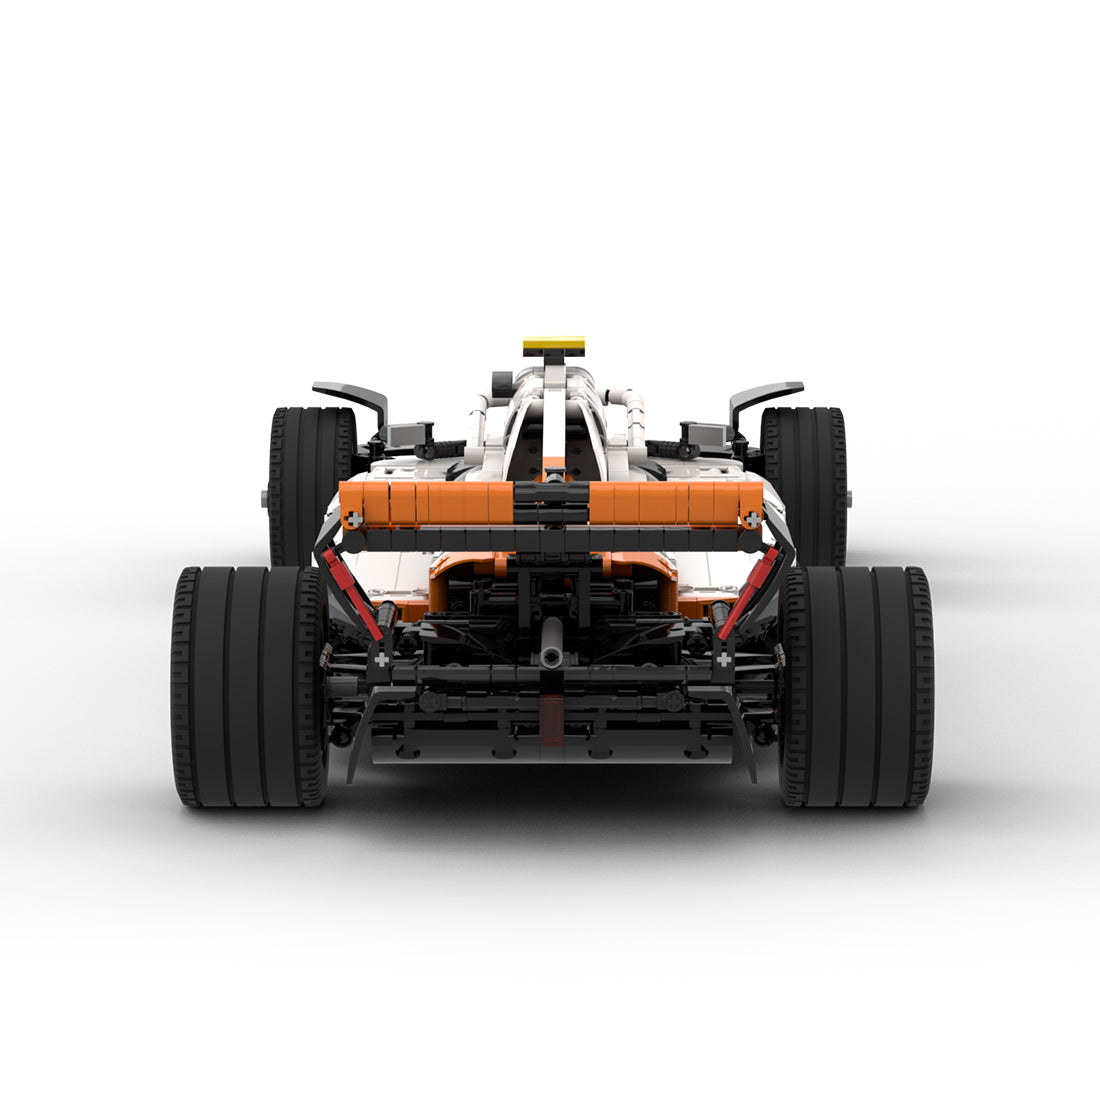 MOC-148597 MCL60 1/8 Scale Racing Car